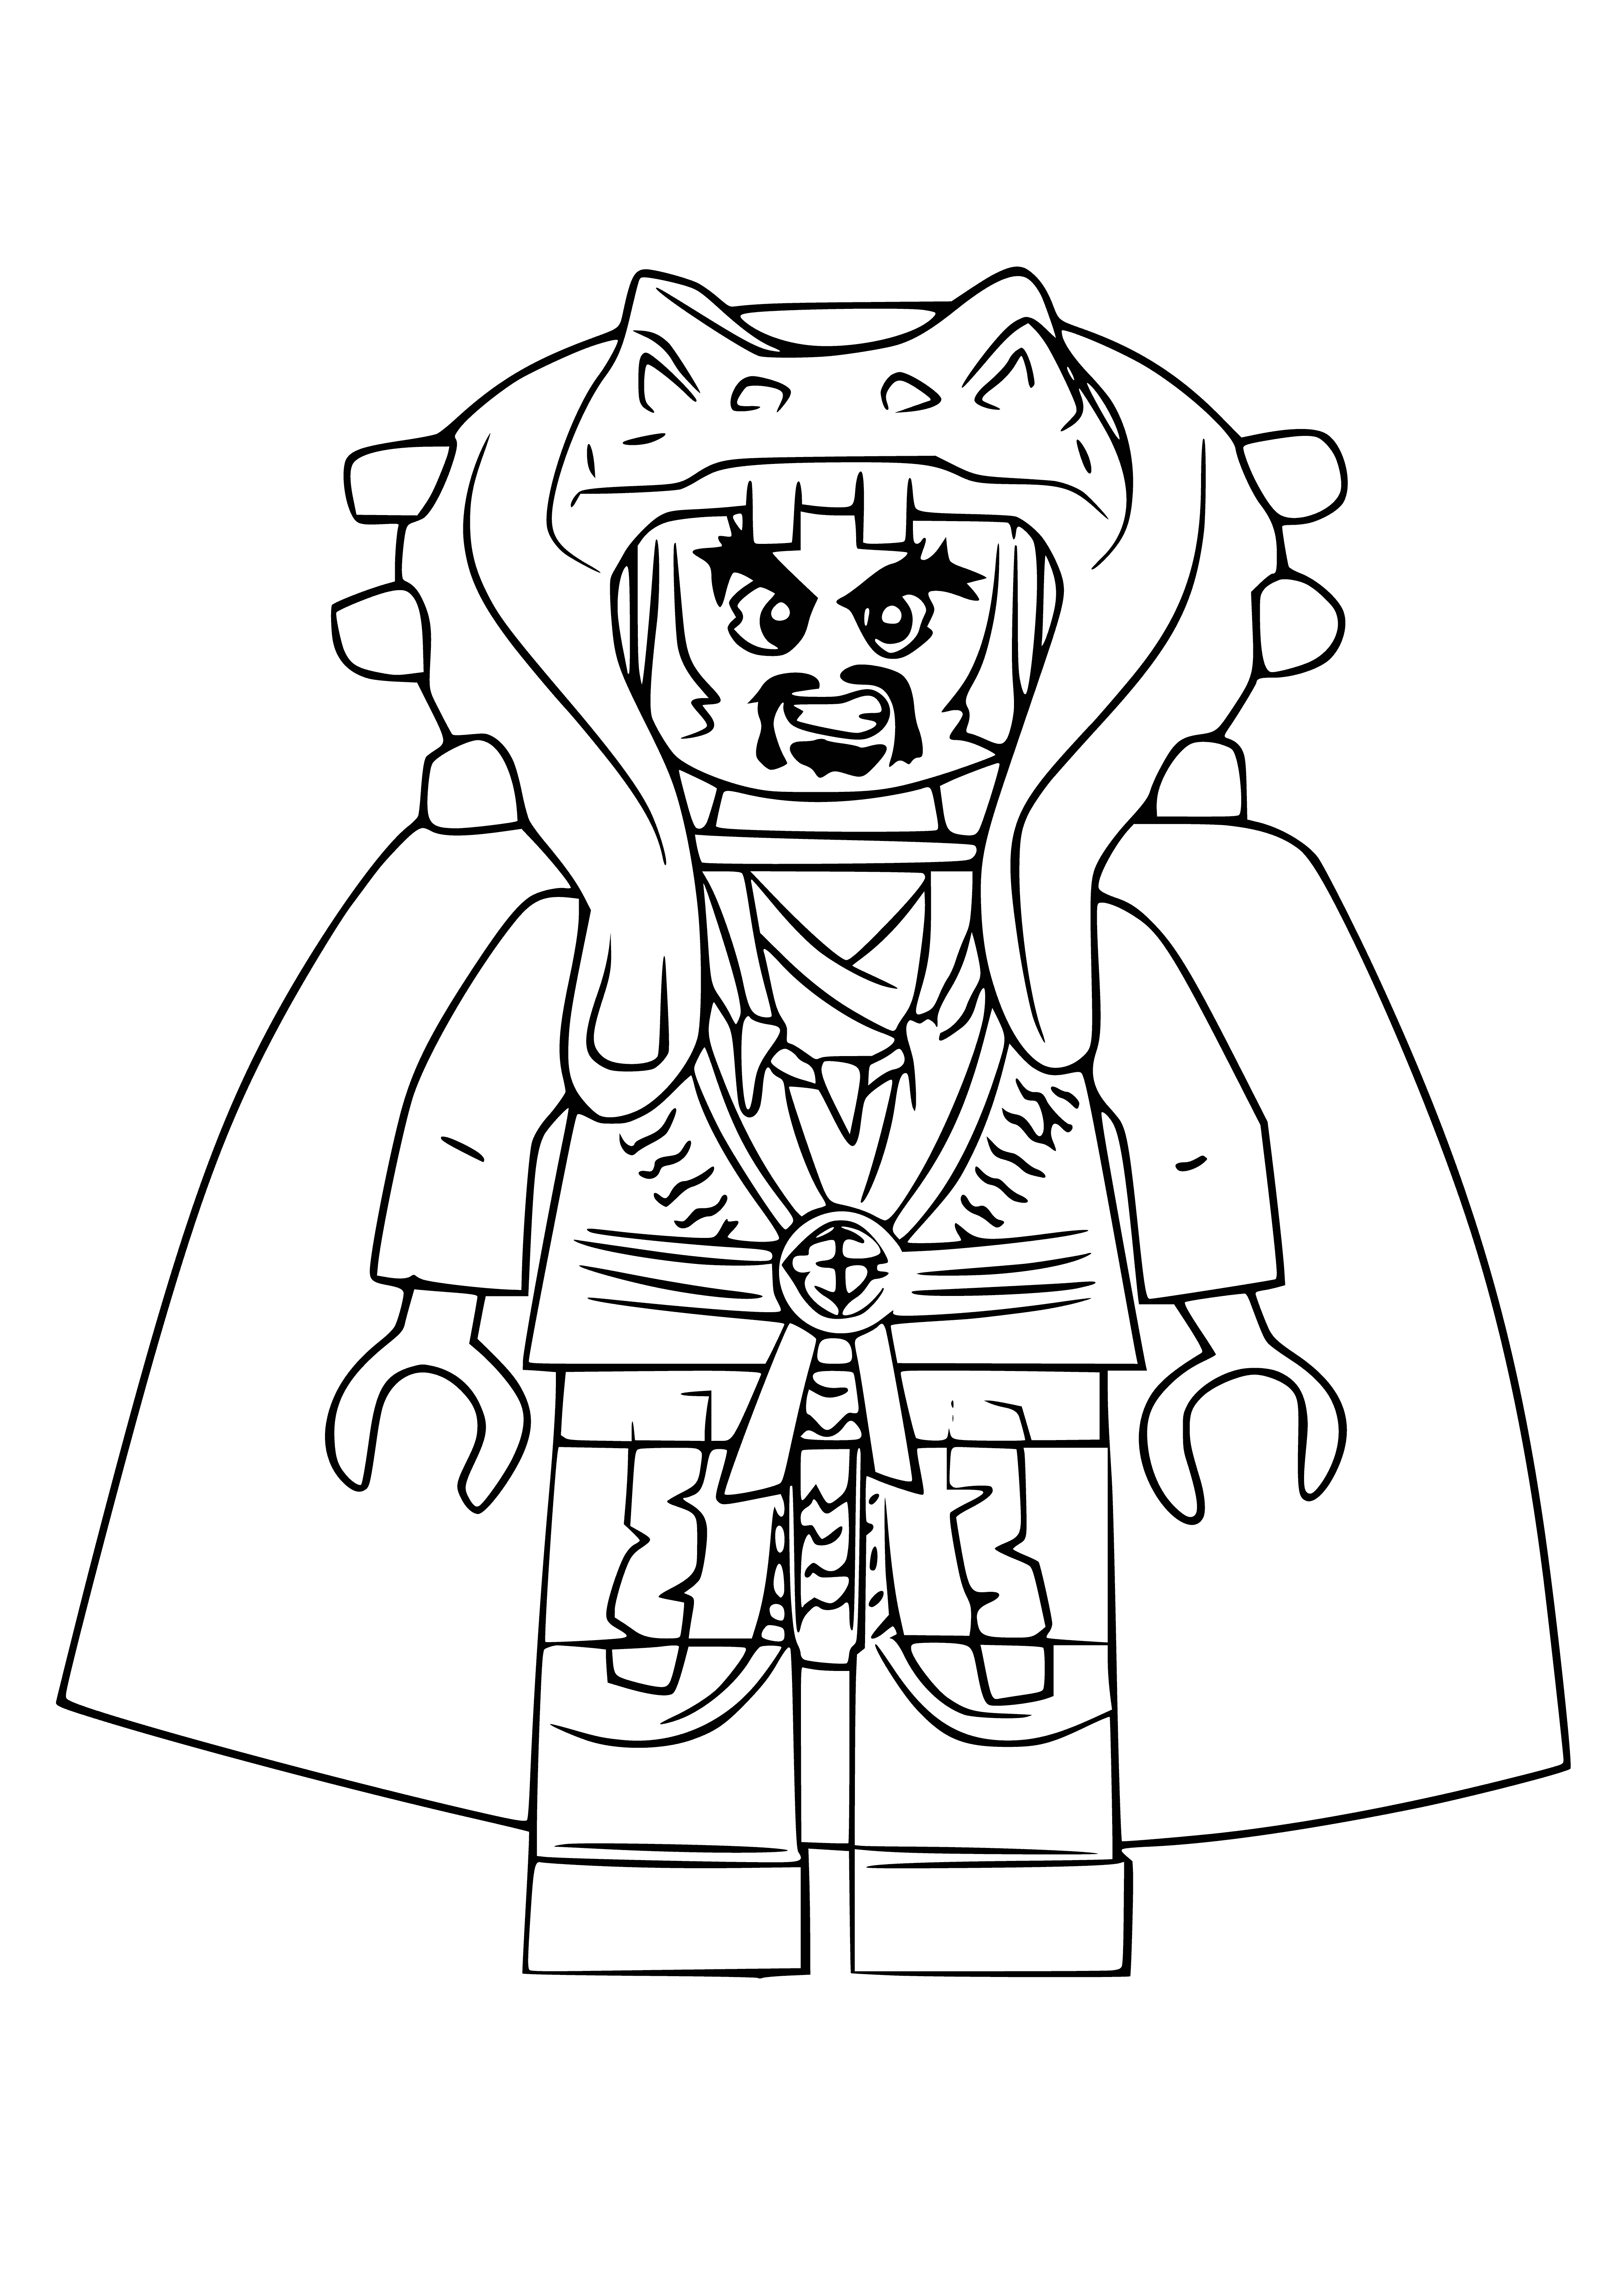 coloring page: Ninjago character with a blue headband, gray beard/moustache, purple cape, white collar. Holding staff in right hand; 4 small blue balls around head.